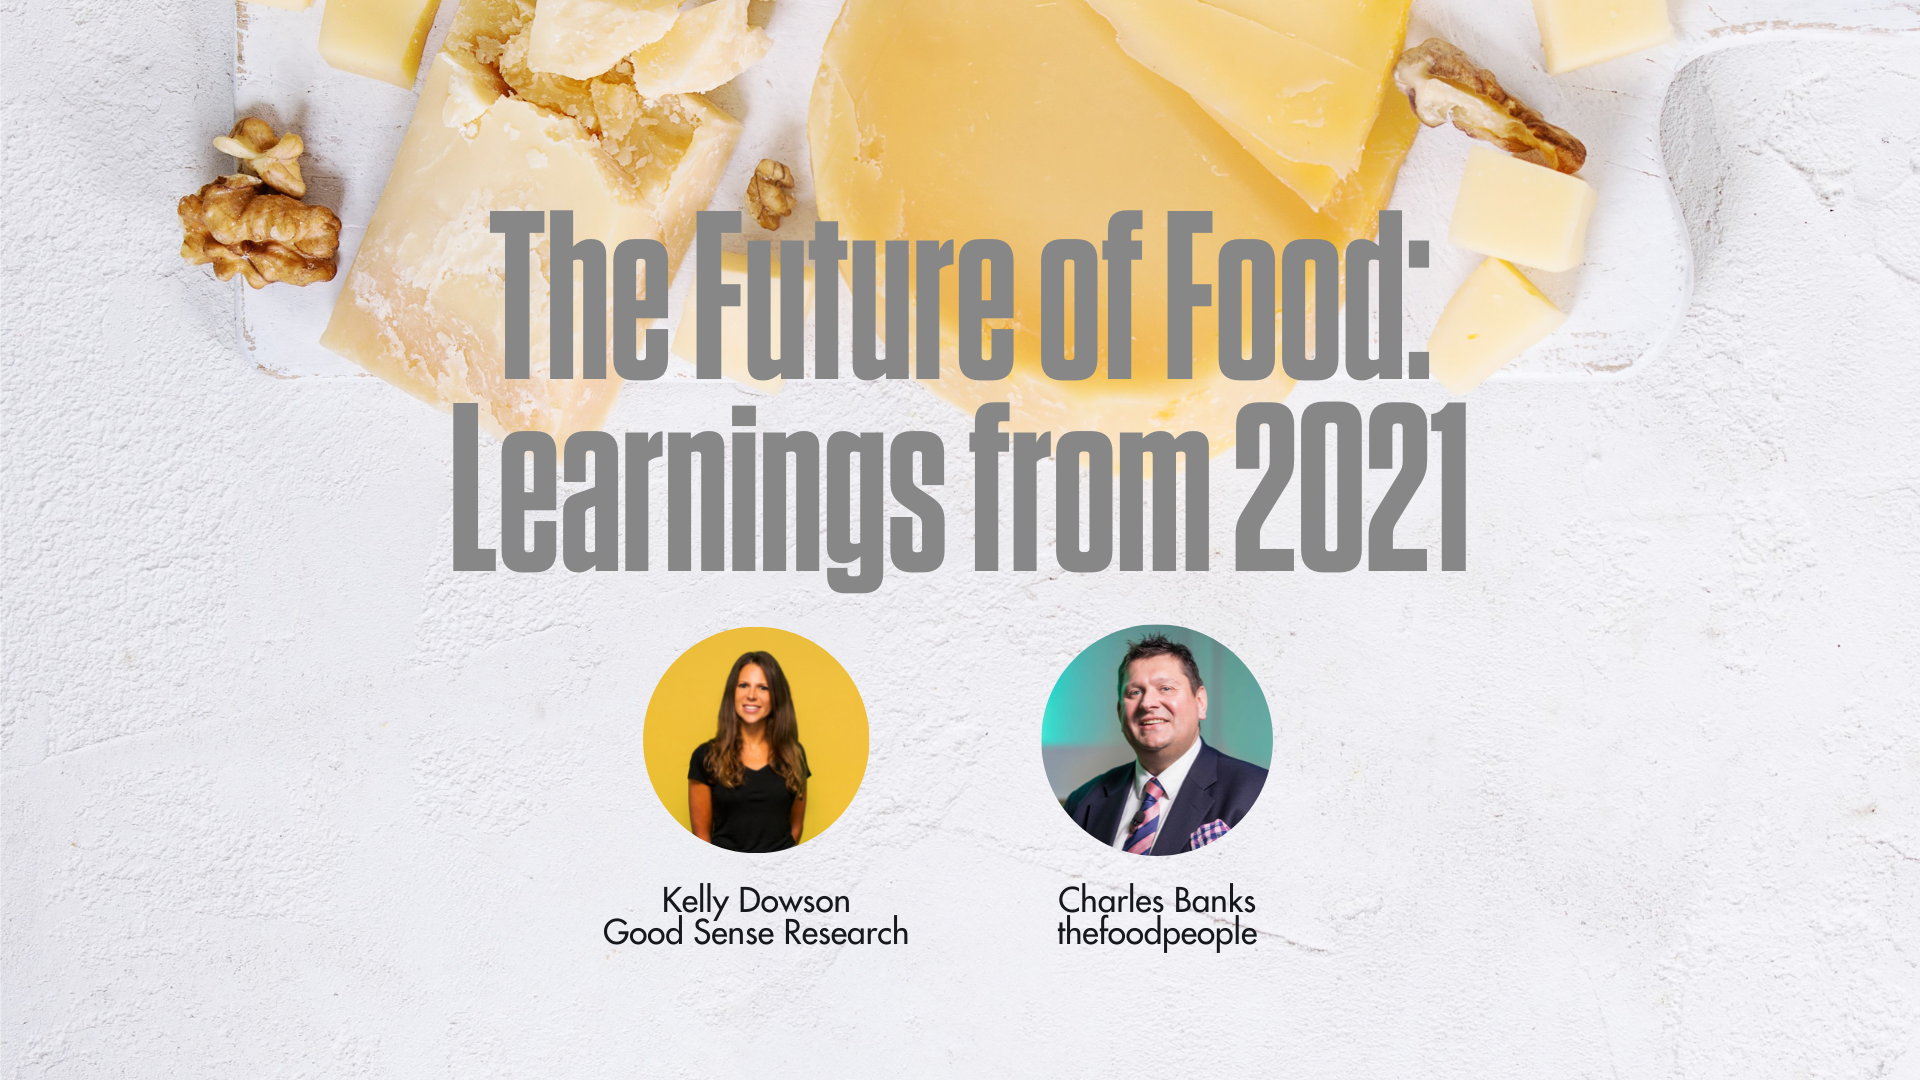 The Future of Food: Learnings from 2021